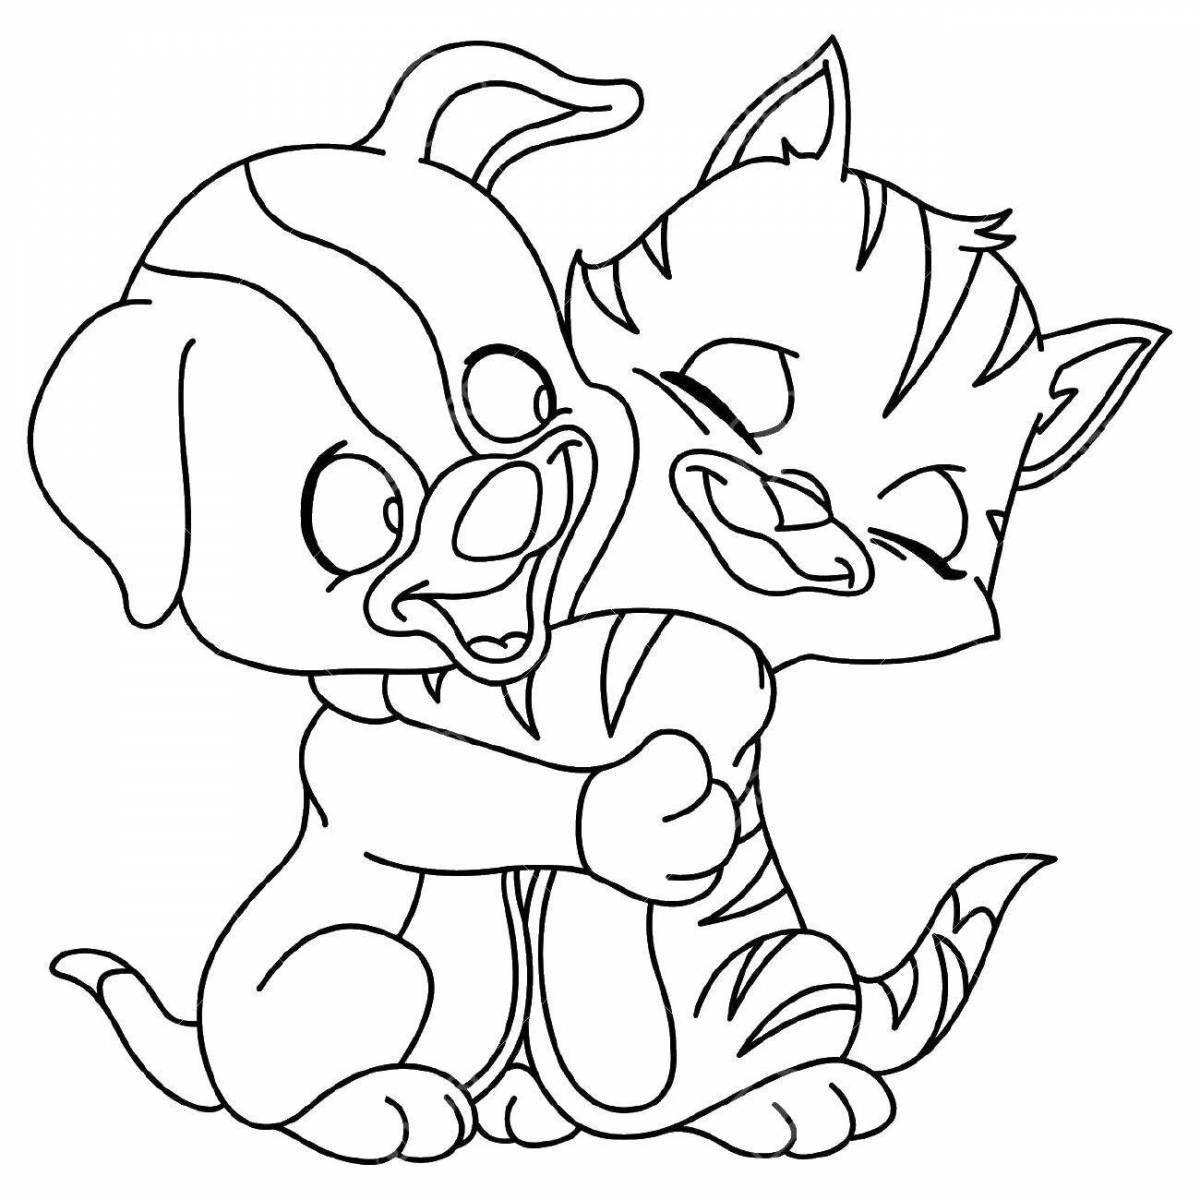 Cute cat and dog together coloring book